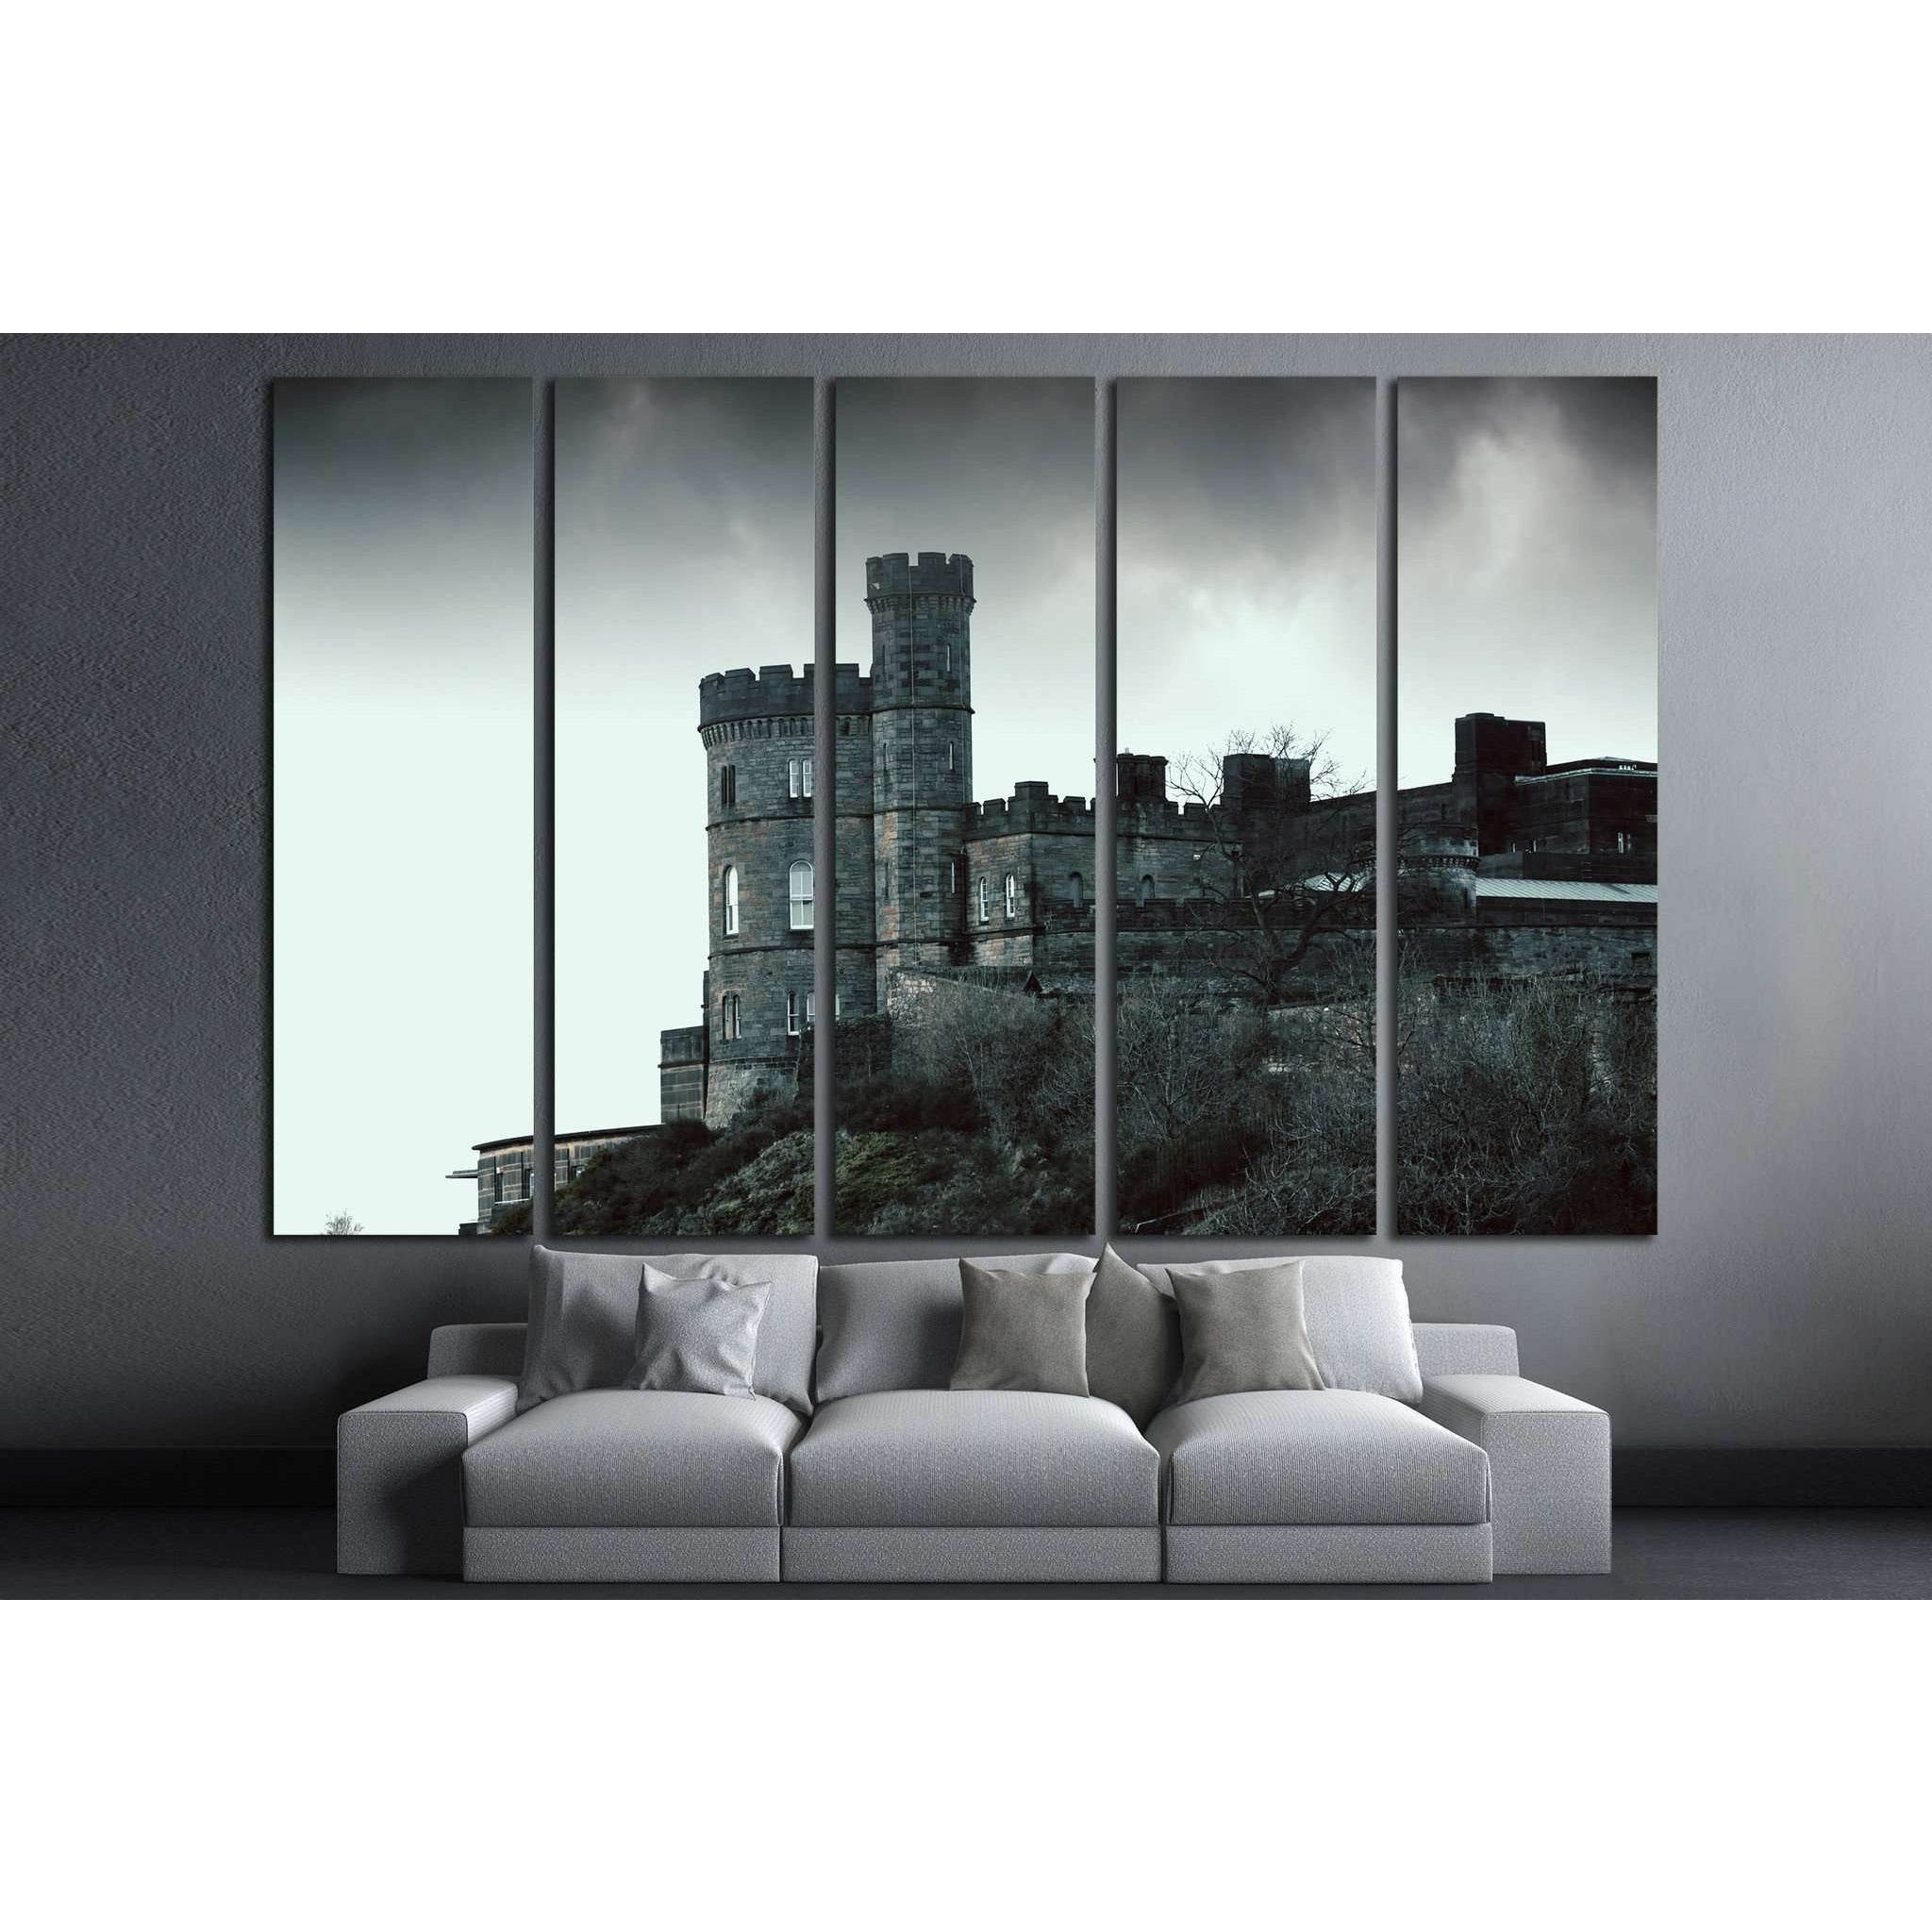 Castle on the rock - horror picture №1801 Ready to Hang Canvas Print